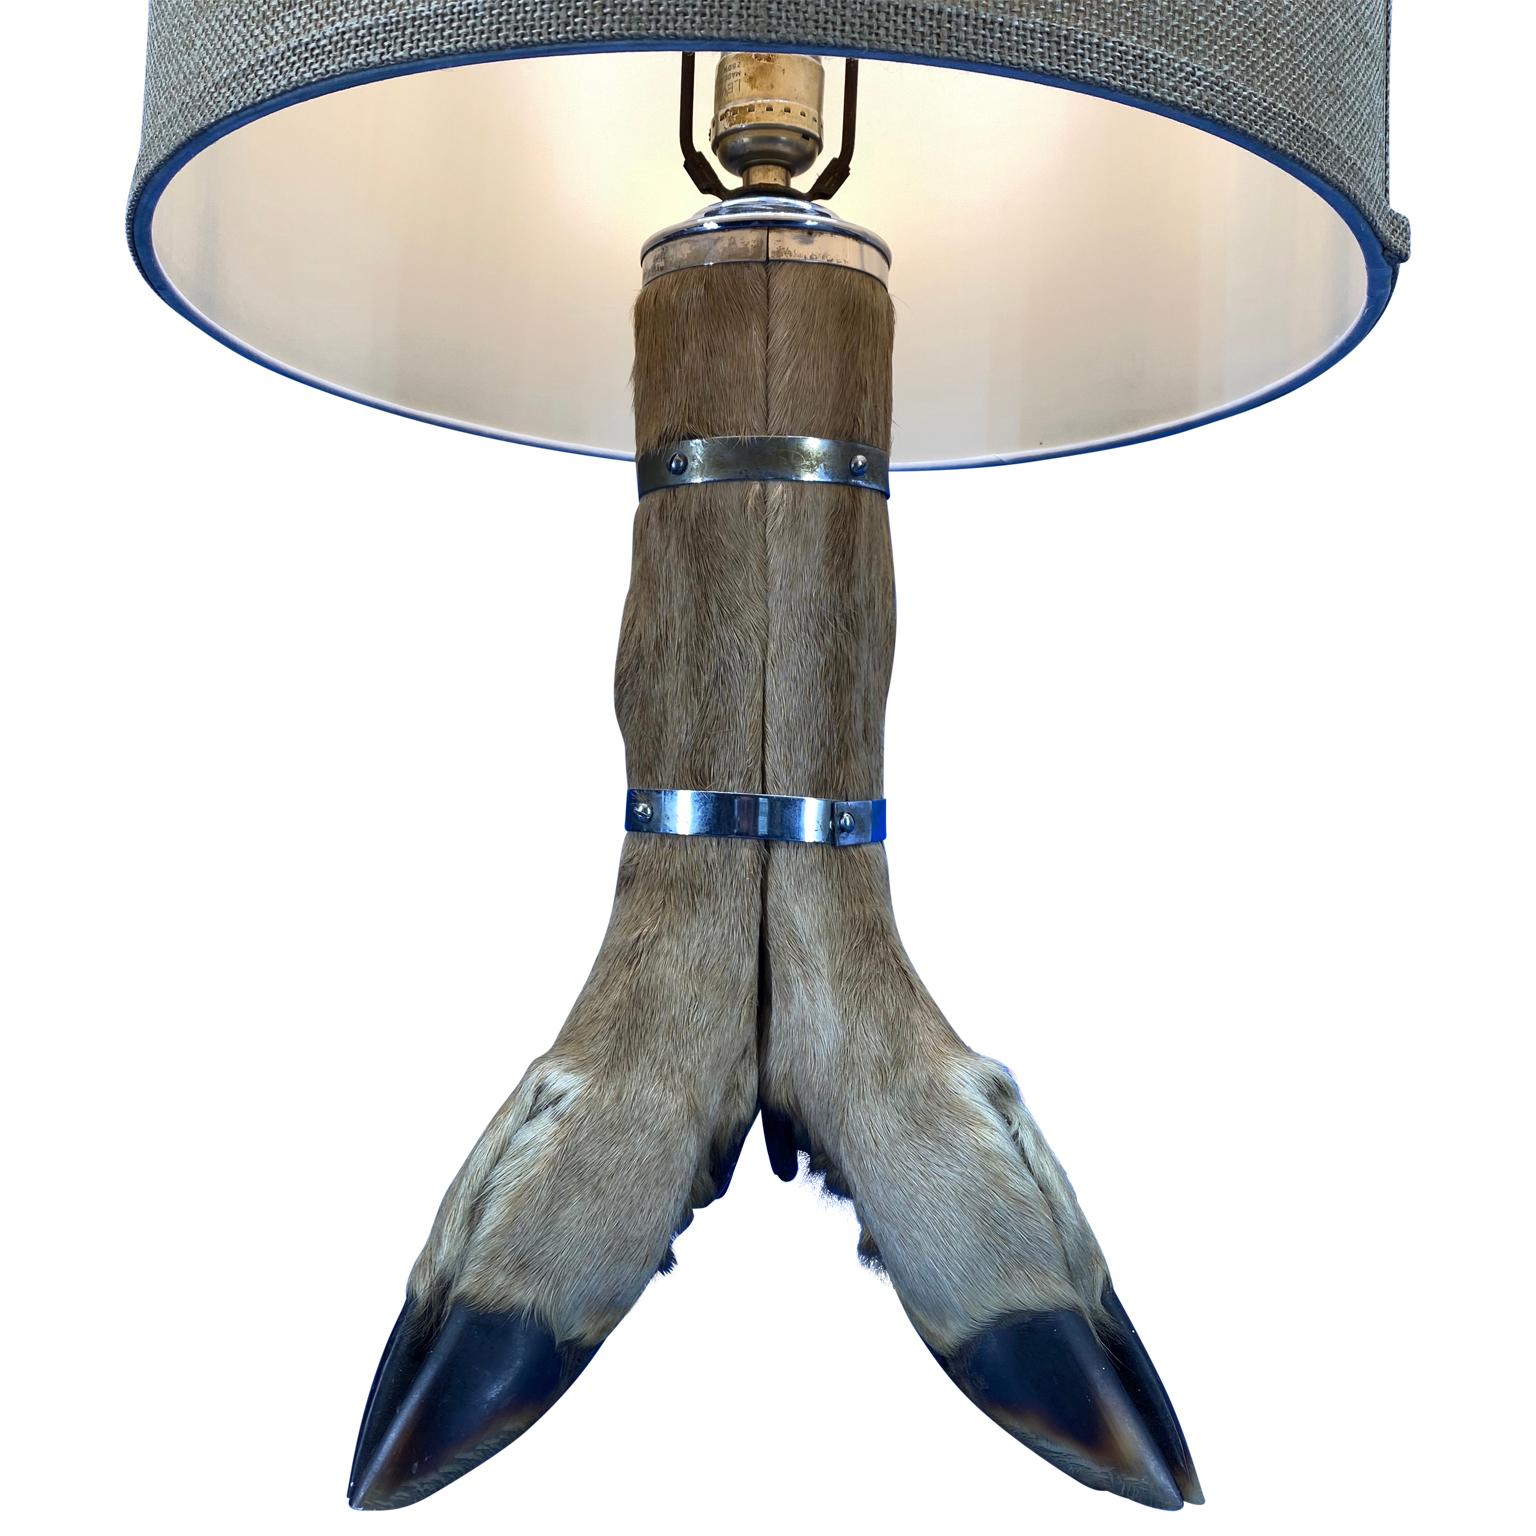 Mid-Century table lamp with 4-tier deer hoof with nickel bands and brass fitted antler finial.

Shade is not included.